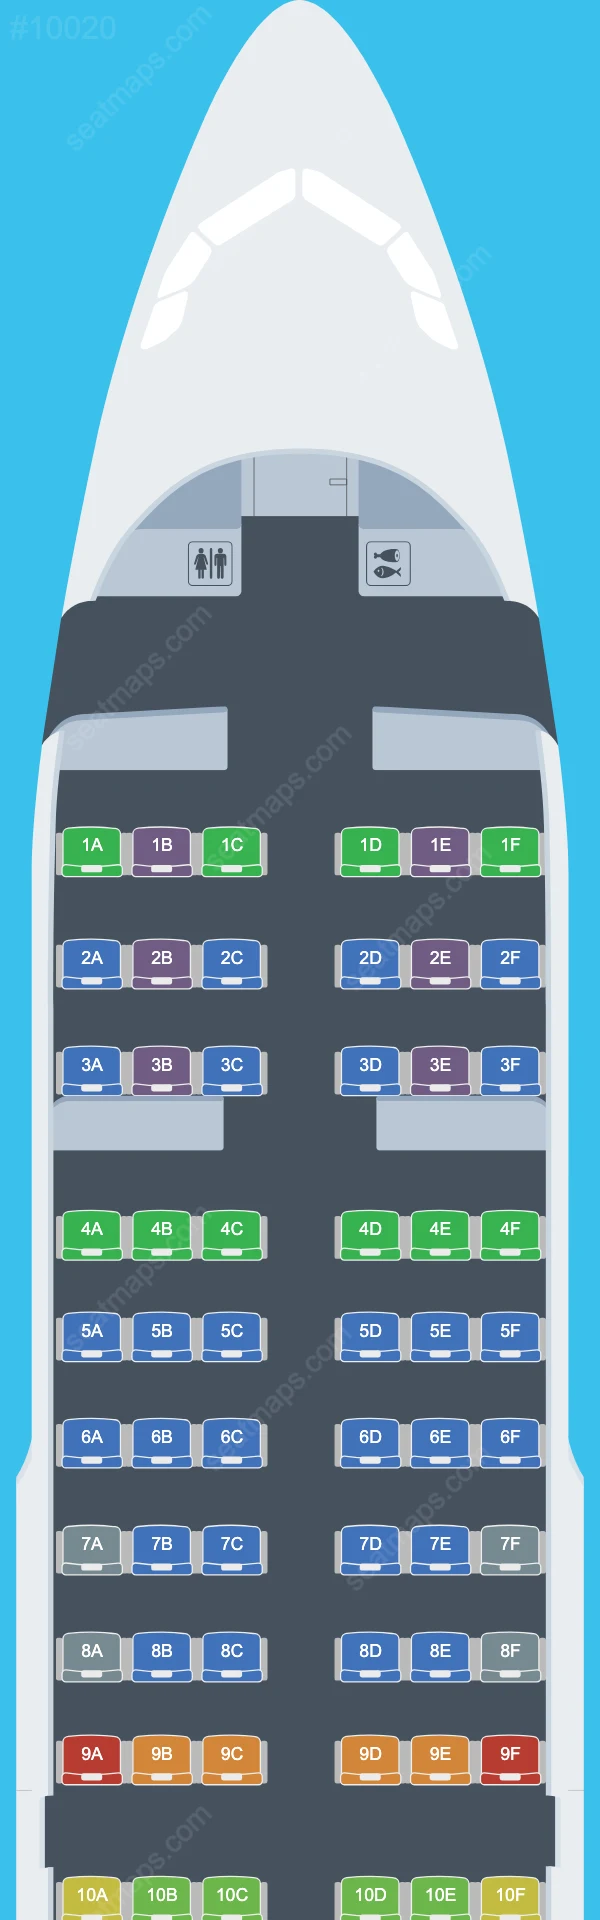 Olympic Air Airbus A319 Seat Maps A319-100